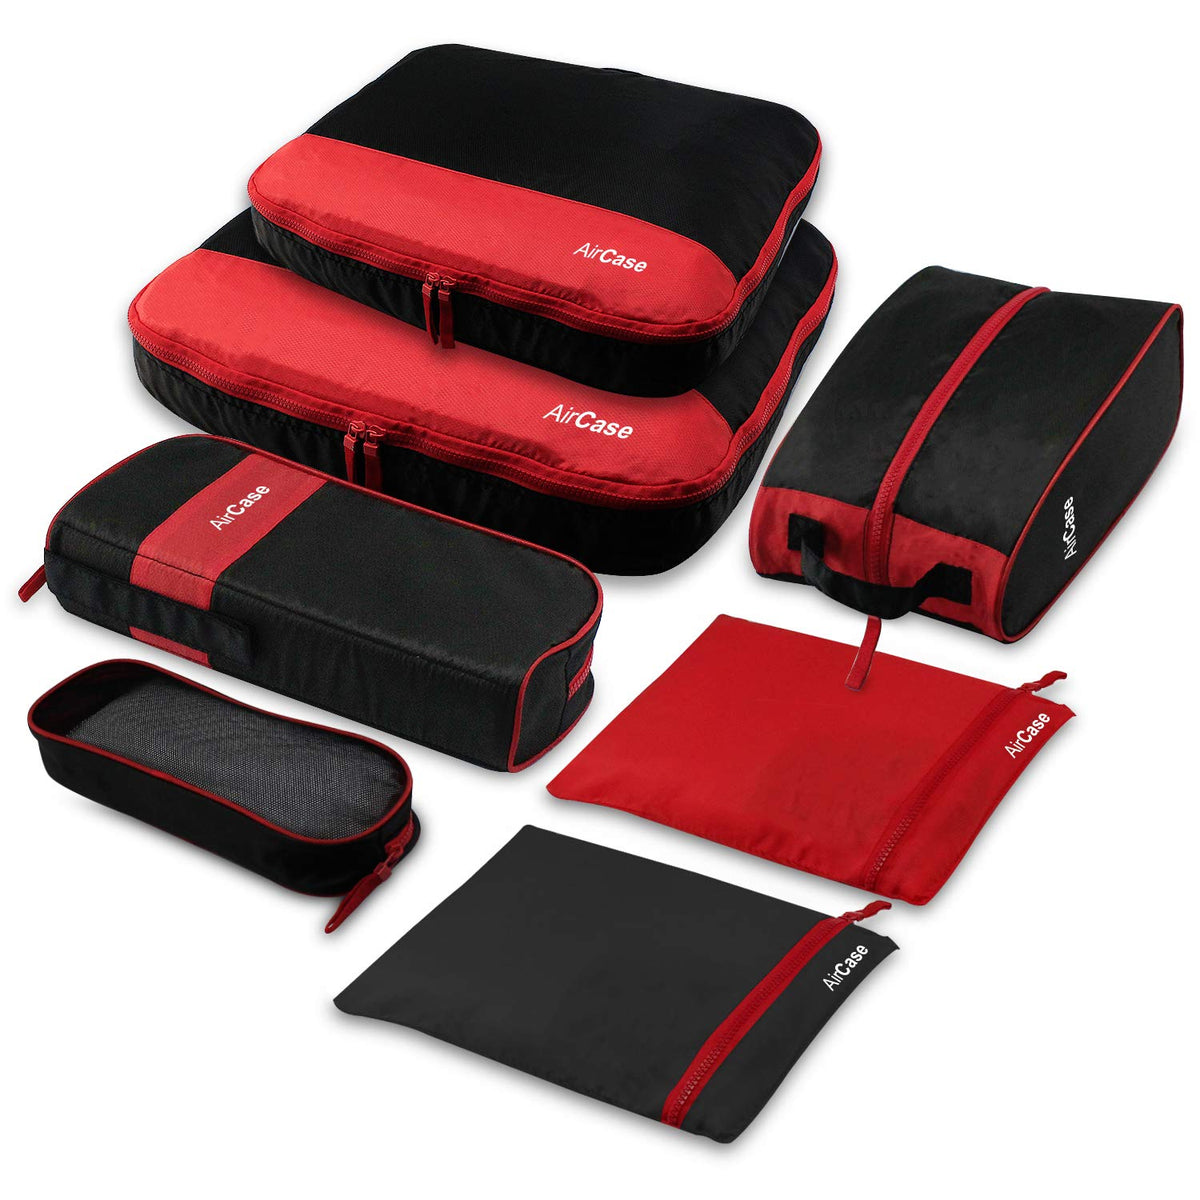 Travel Organizer with 7 Packing Cubes